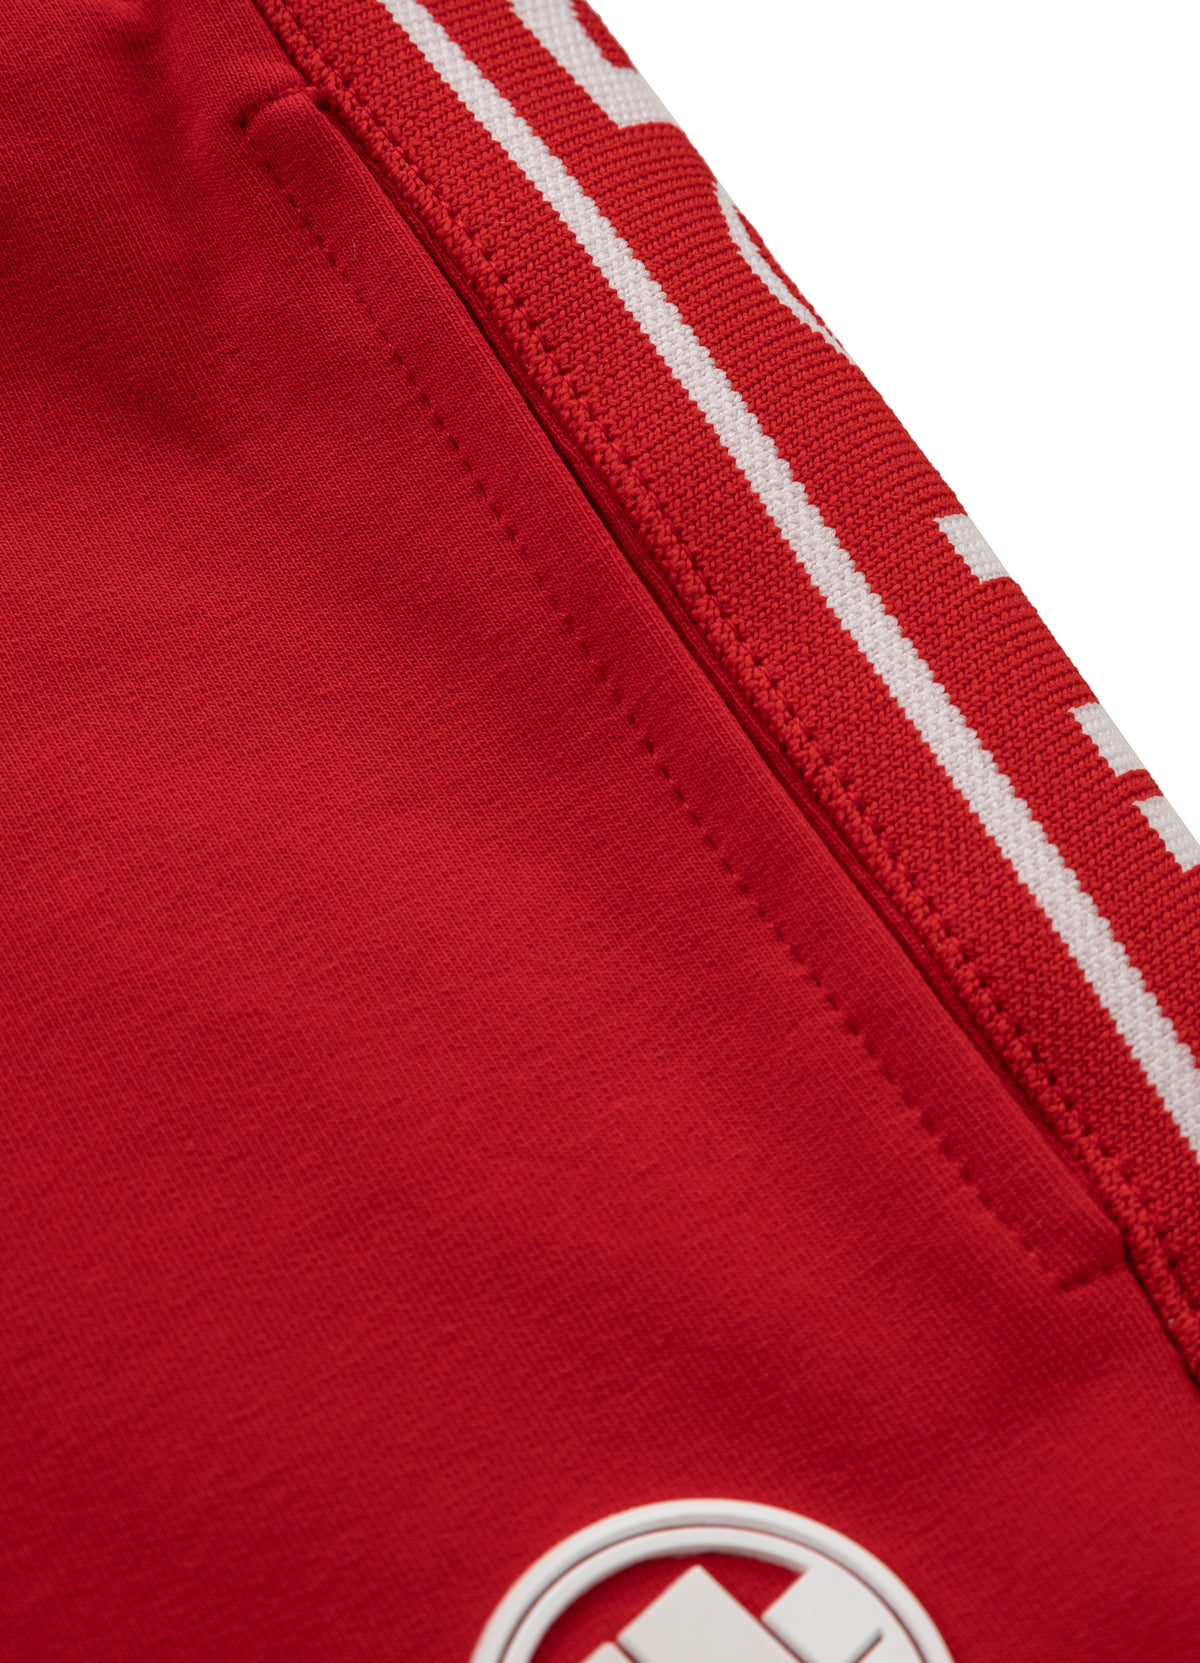 SMALL LOGO FRENCH TERRY 21 Red shorts.